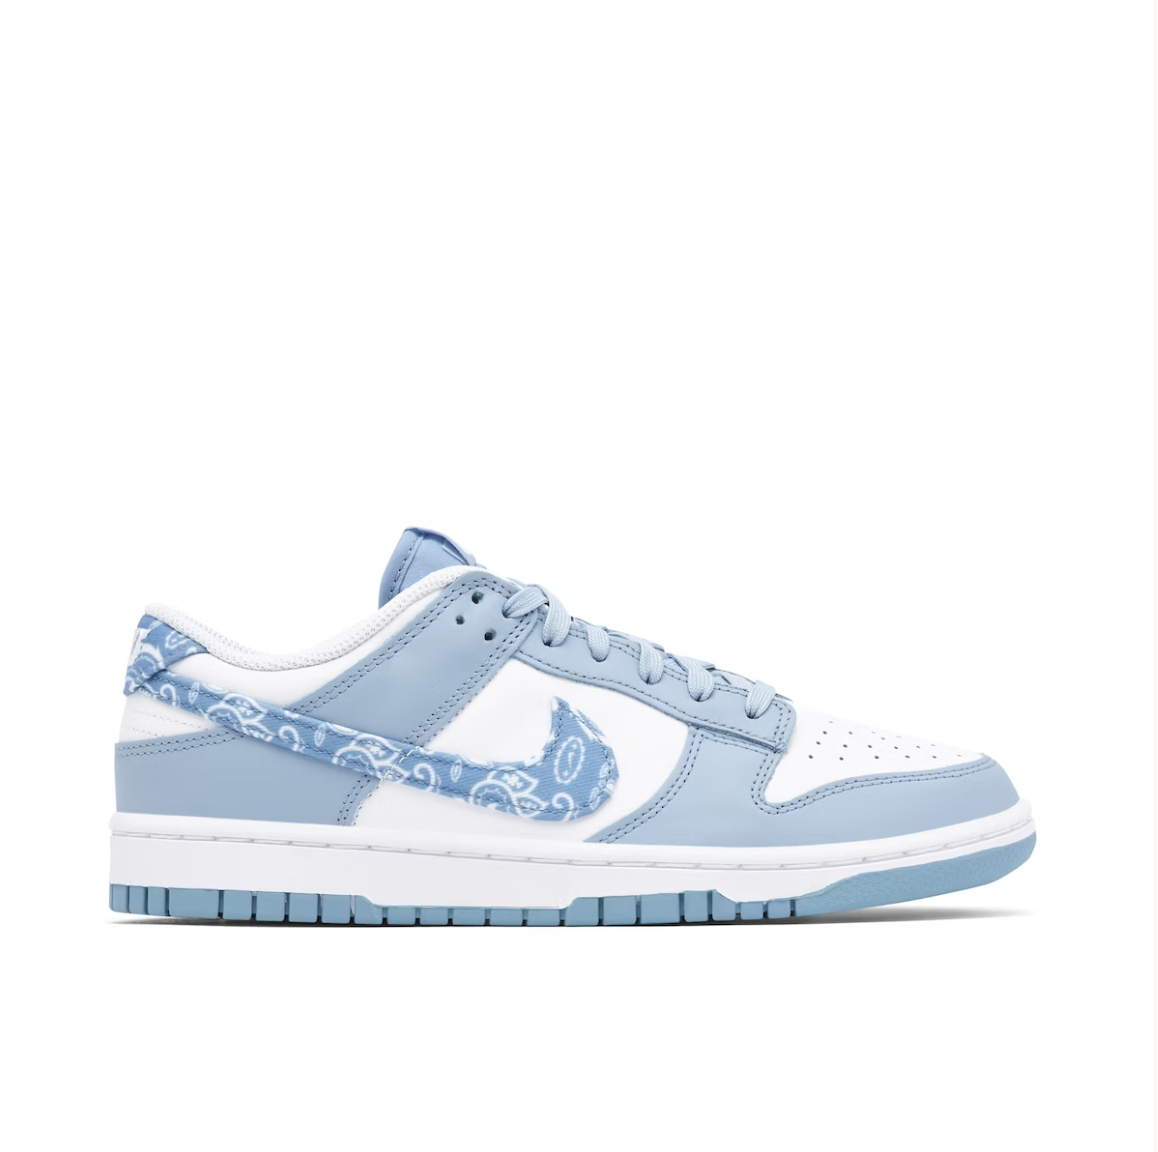 NIKE DUNK low Paisley Pack ‘WORN BLUE’